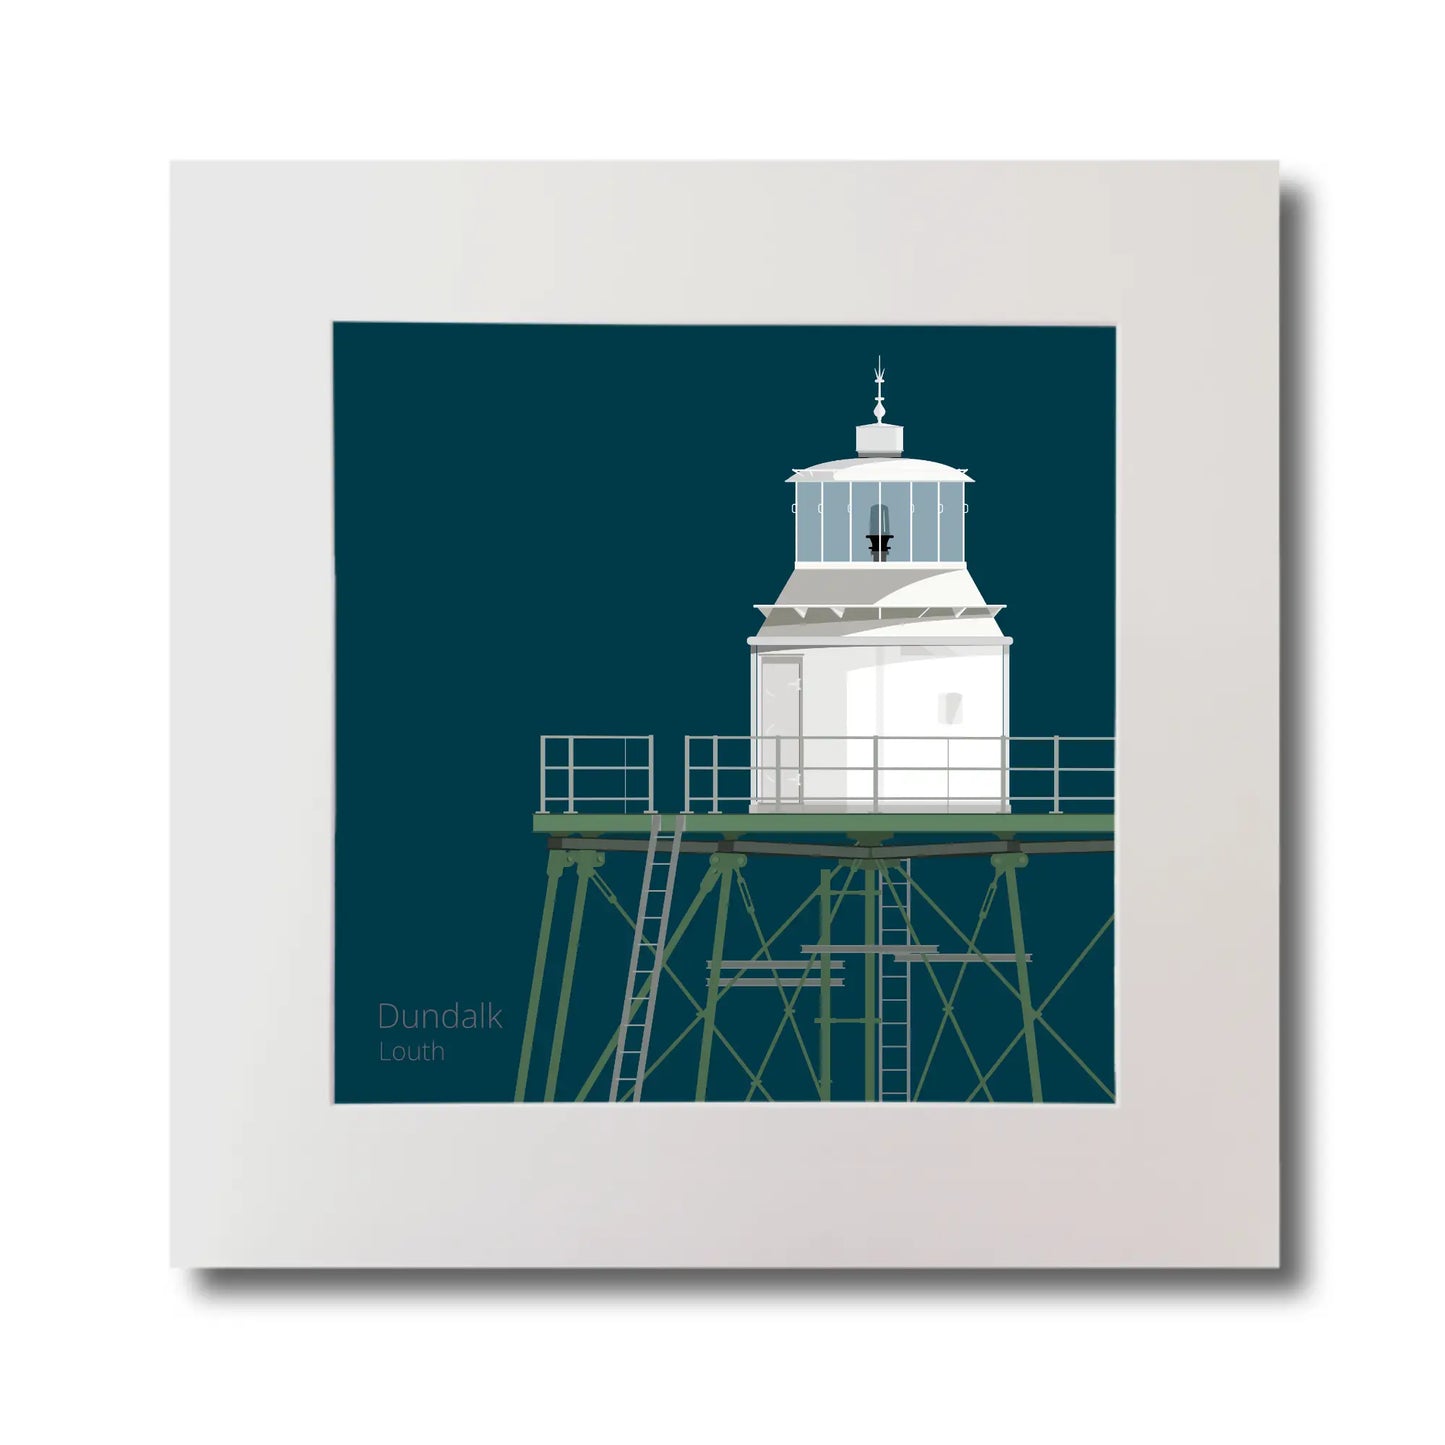 Illustration  Dundalk lighthouse on a midnight blue background, mounted and measuring 30x30cm.